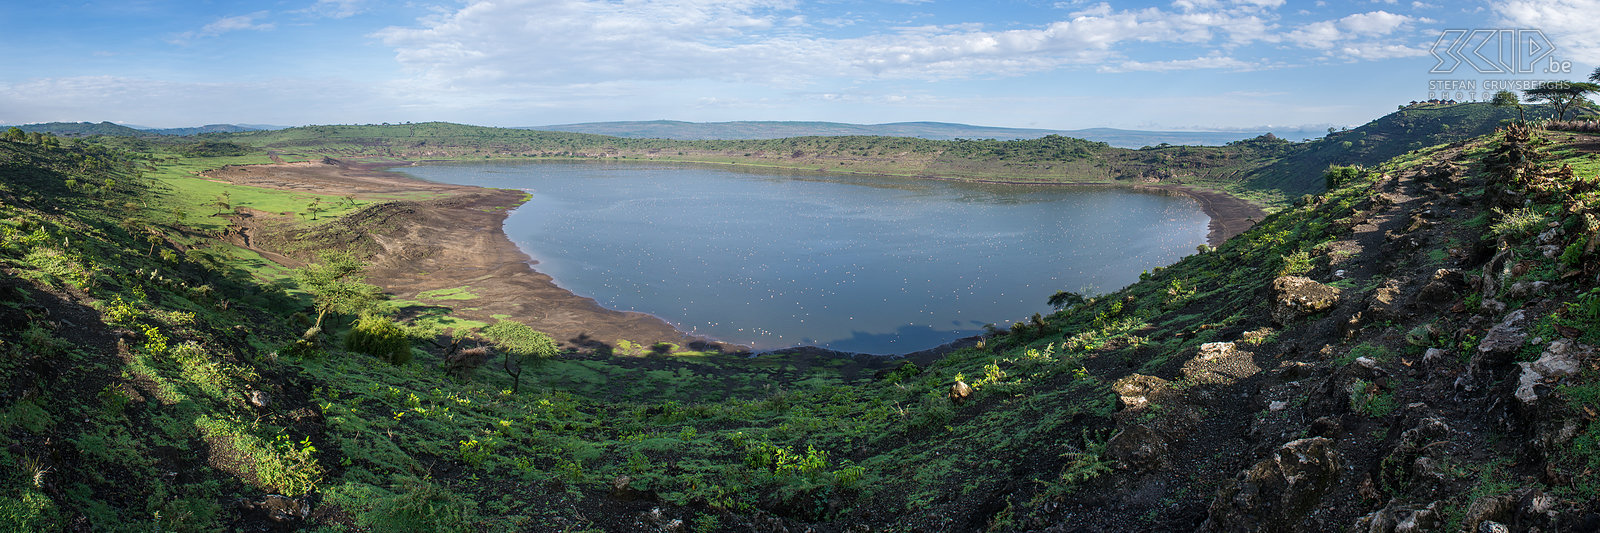 Lake Chitu Abiata-Shala National Park is located 290 km south of Addis Ababa at an altitude between 1540-2075 meters. The park is not interesting at all to do a safari but we were able to spot a few antelopes, warthogs and ostriches. The Lakes Lake Abiata and the small but beautiful Lake Chitu are much more interesting. Blue green alga provide food for more than 10 000 flamingos throughout the year. We stayed in the '10,000 flamingos lodge' which overlooks the small Lake Chitu. Stefan Cruysberghs